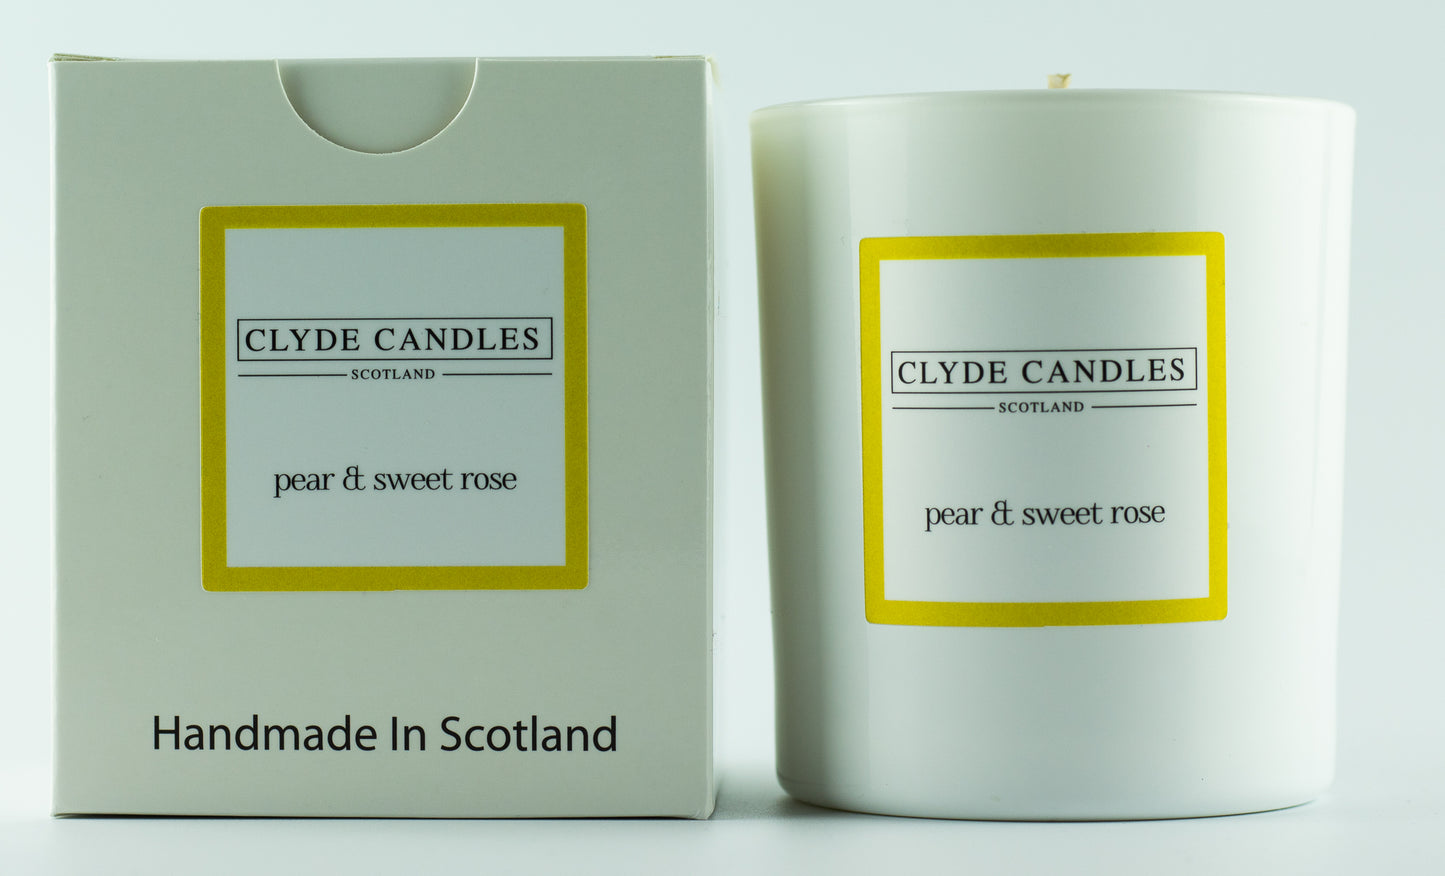 Clyde candles pear and sweet rose glass gift box hand made soy candle made in scotland